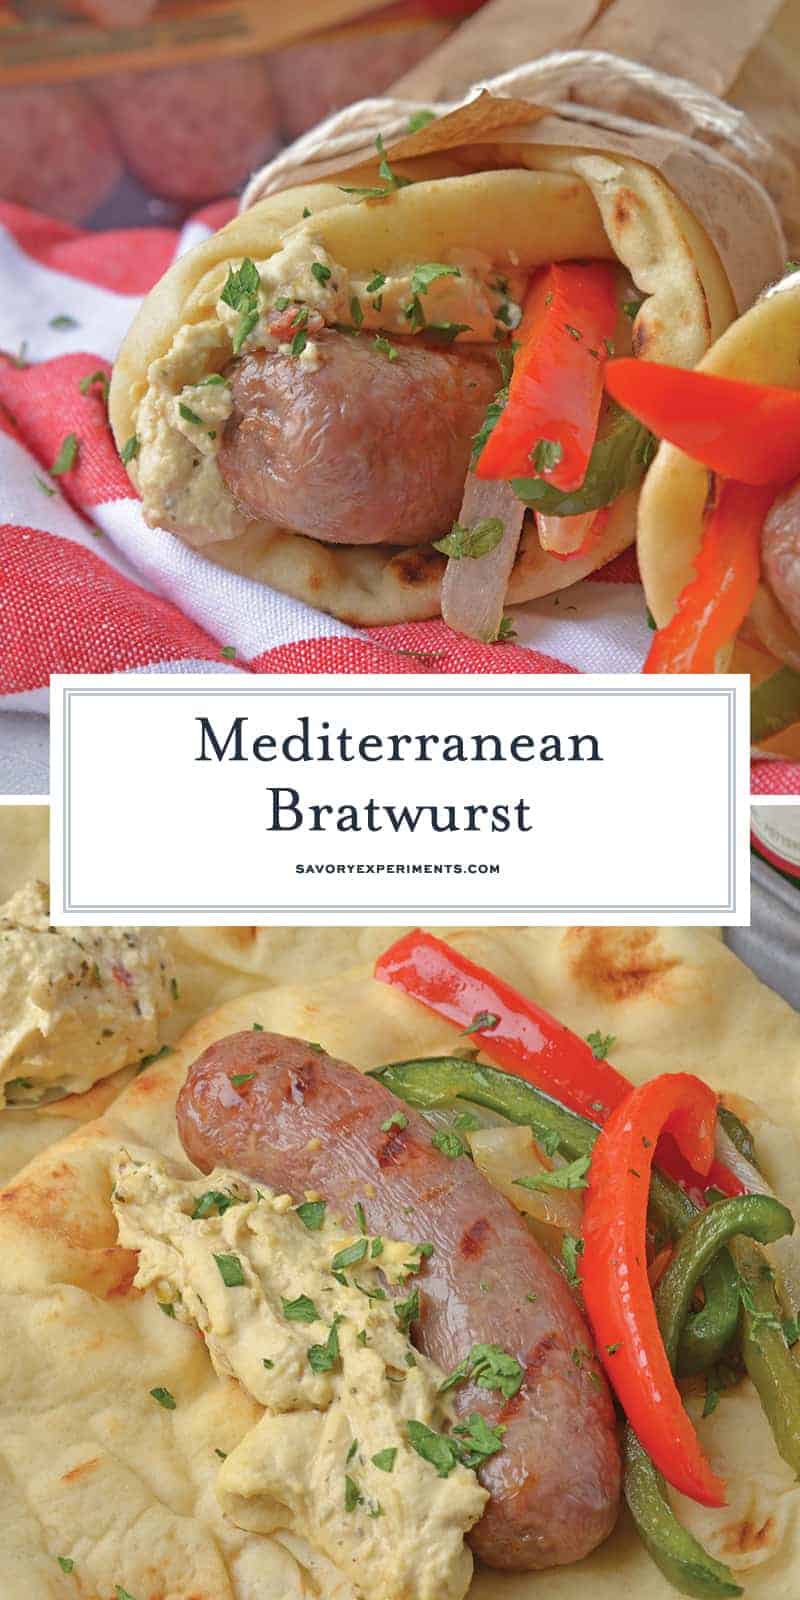 Mediterranean Bratwurst use juicy bratwurst, sautéed bell peppers and onion, garlic hummus and wrapped in tender naan bread. A simple grilled summer meal. #bratwurstsandwich www.savoryexperiments.com 